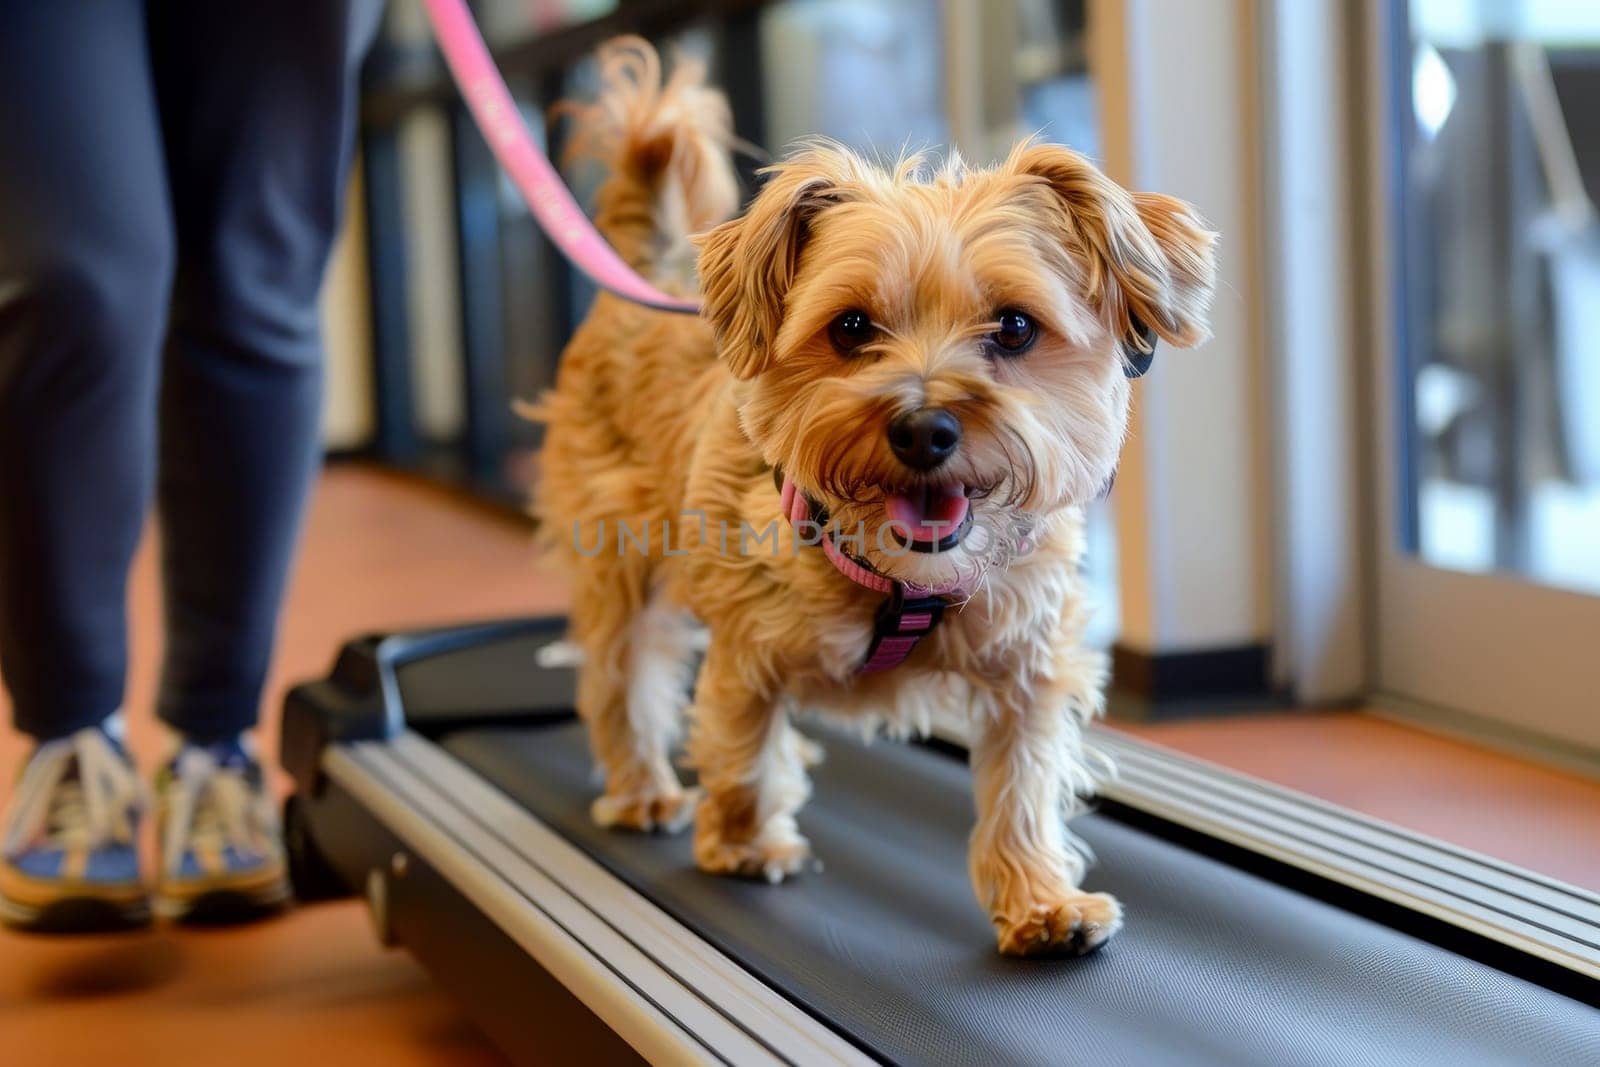 A small dog is running on a treadmill.